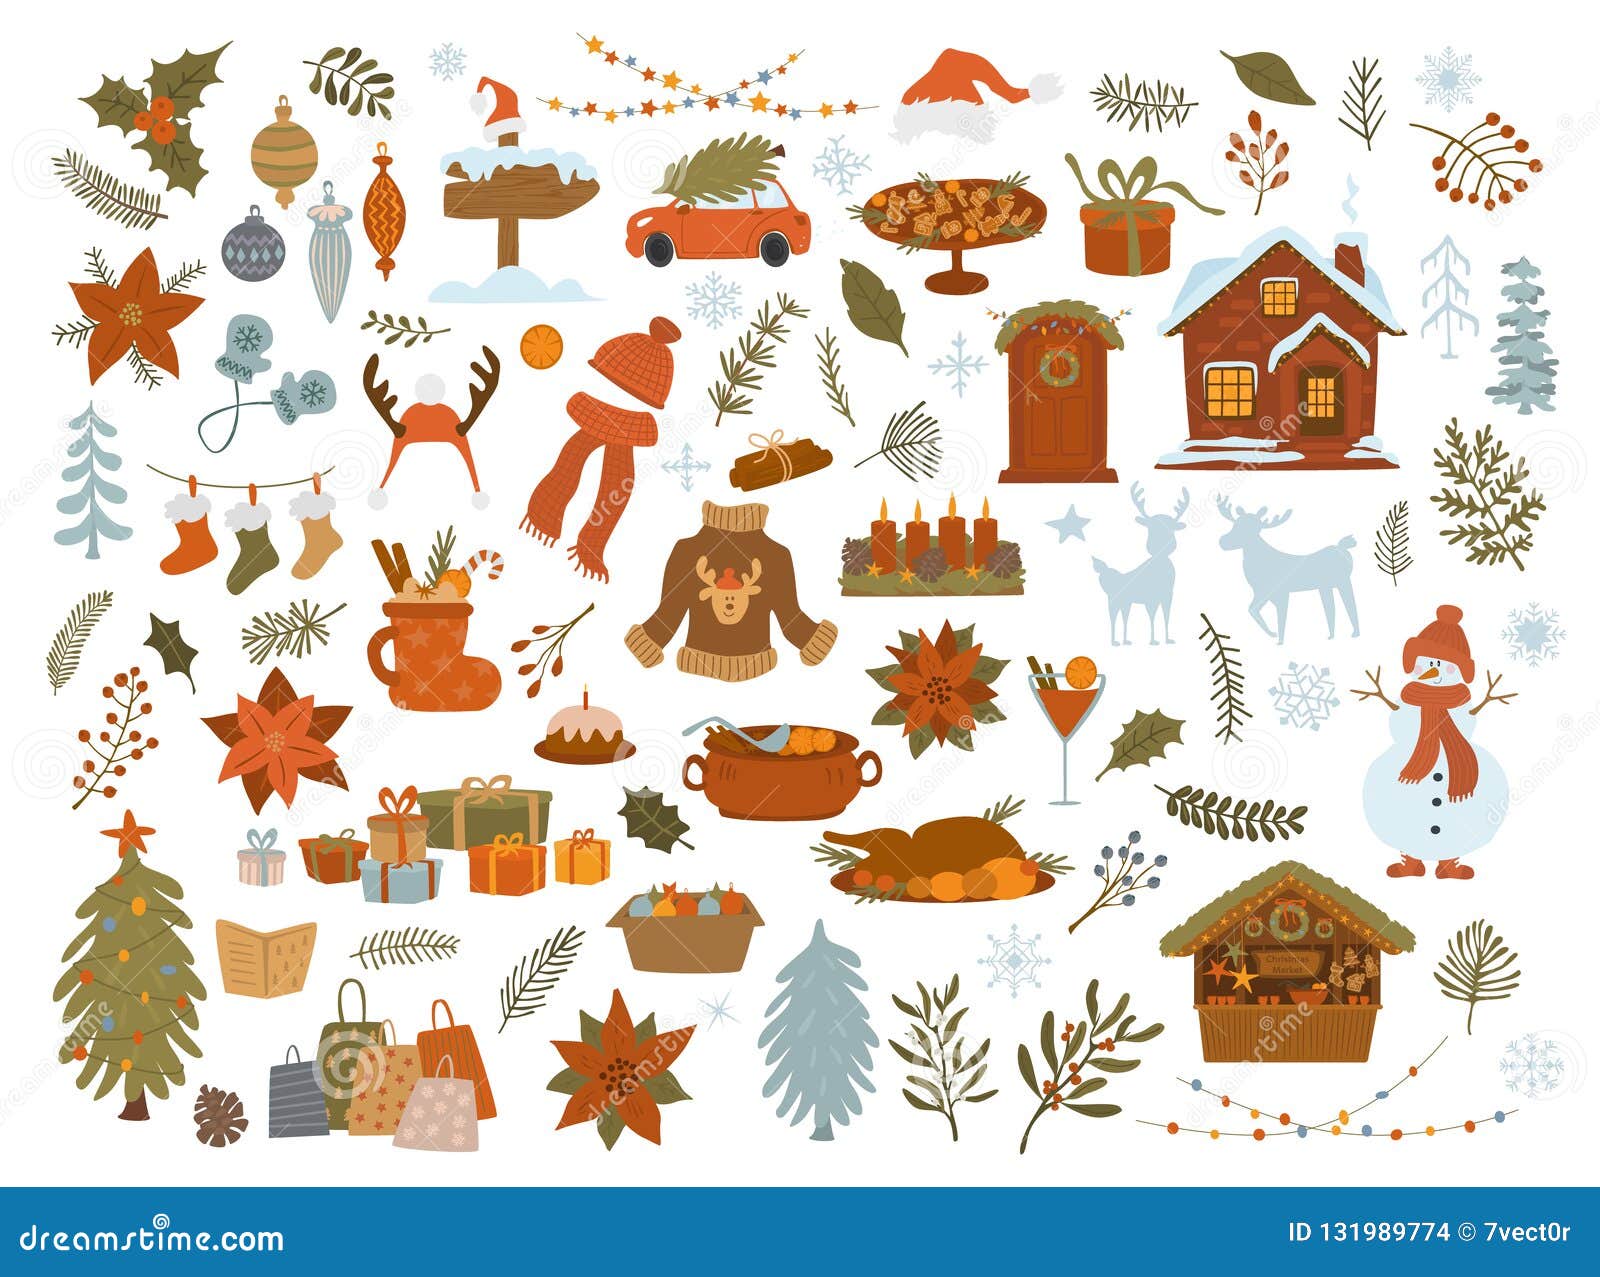 christmas objects items set, xmas tree, lights gifts, house, car, decoration, foliage    graphic